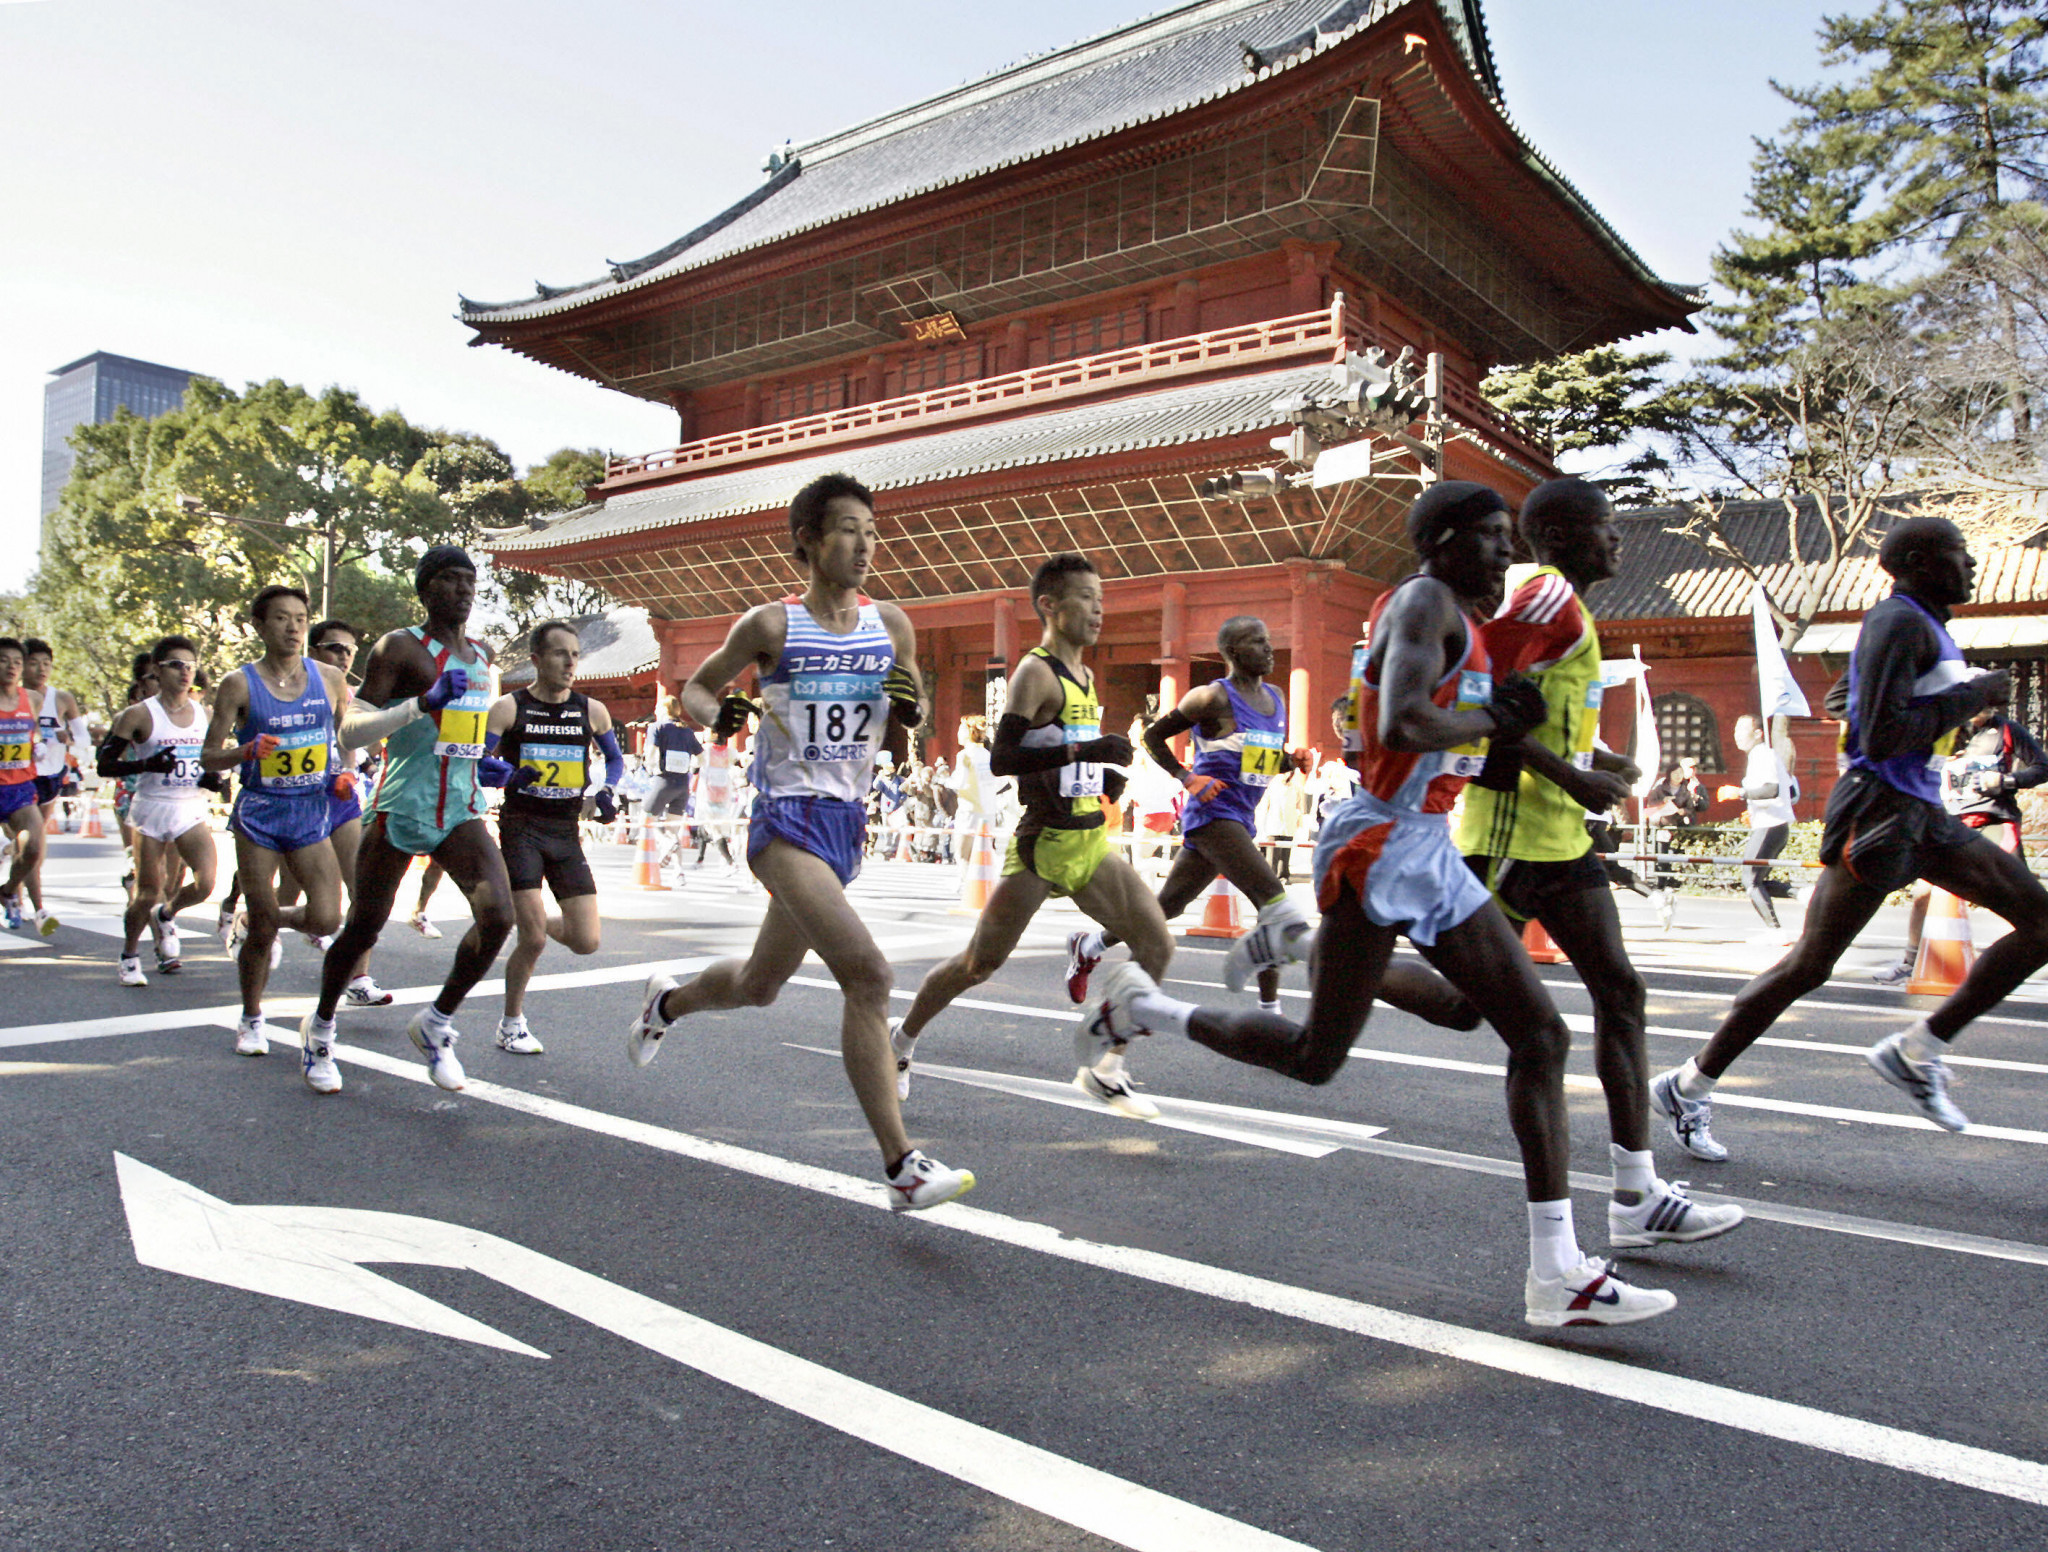 The 2021 Tokyo Marathon has moved from March to October ©Getty Images